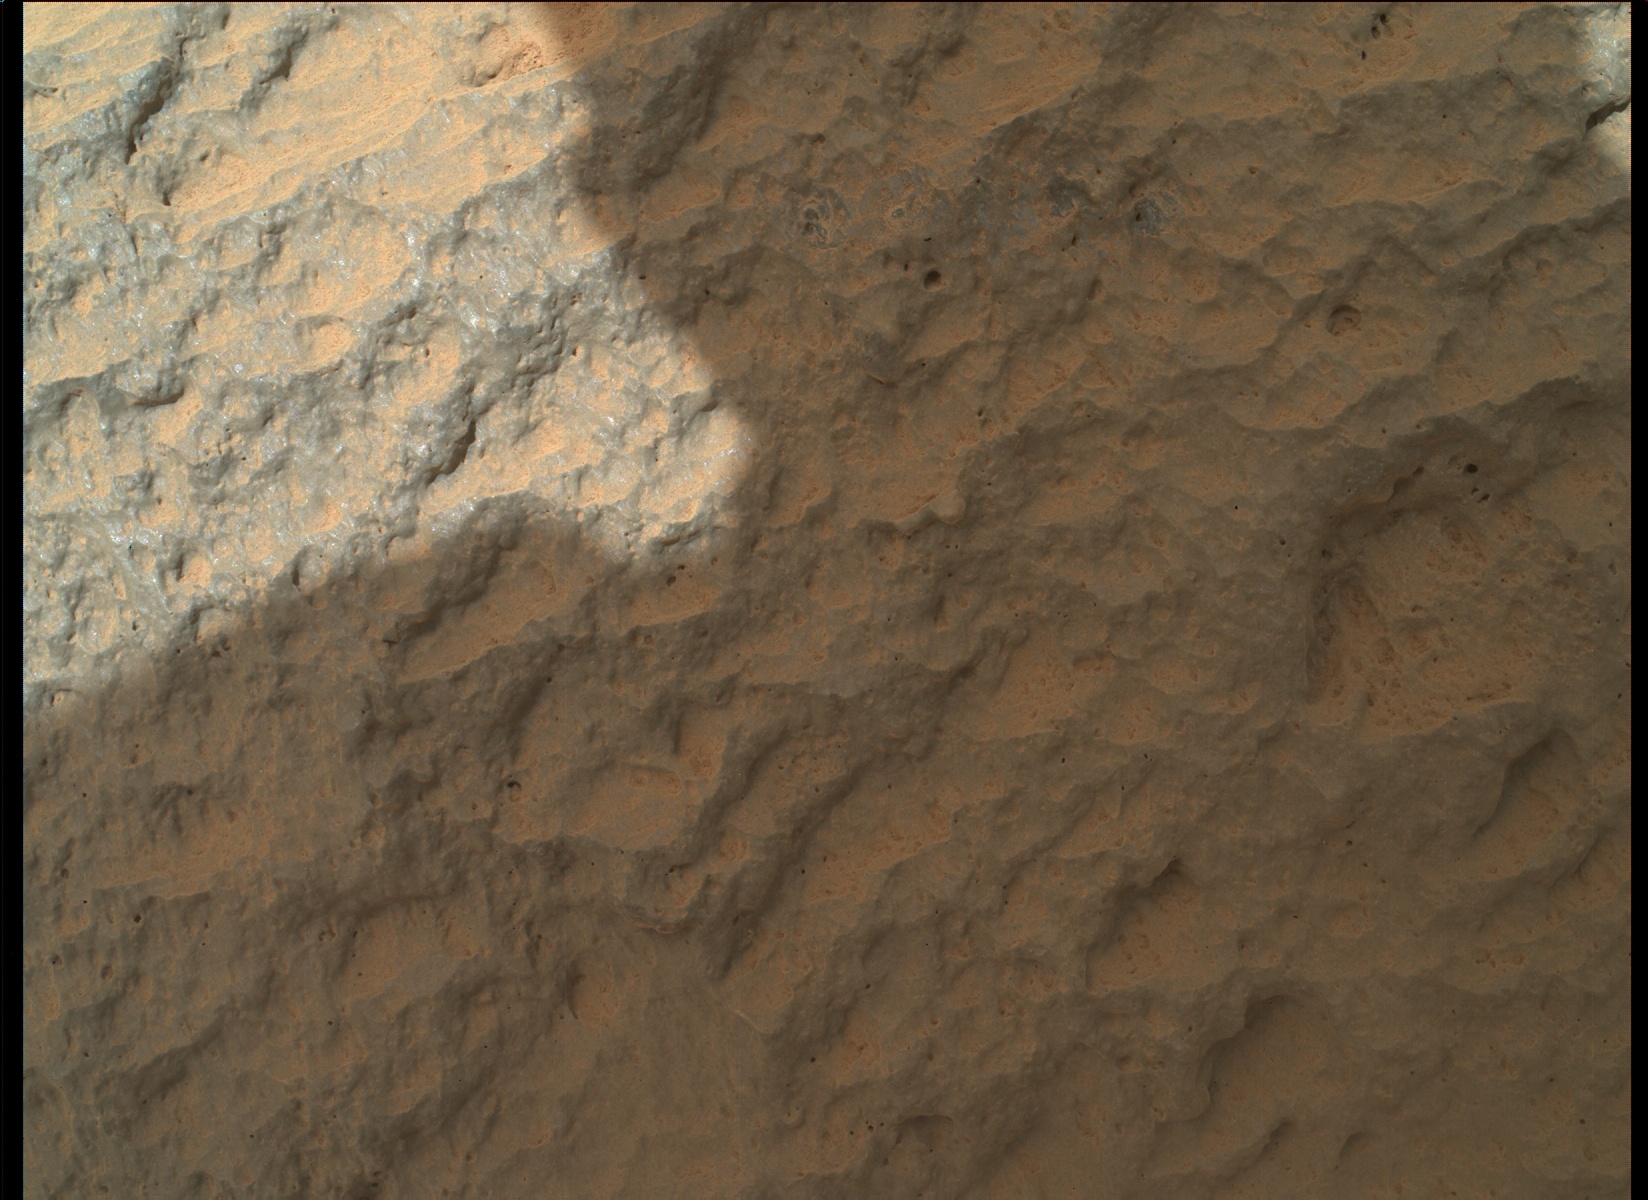 Nasa's Mars rover Curiosity acquired this image using its Mars Hand Lens Imager (MAHLI) on Sol 47